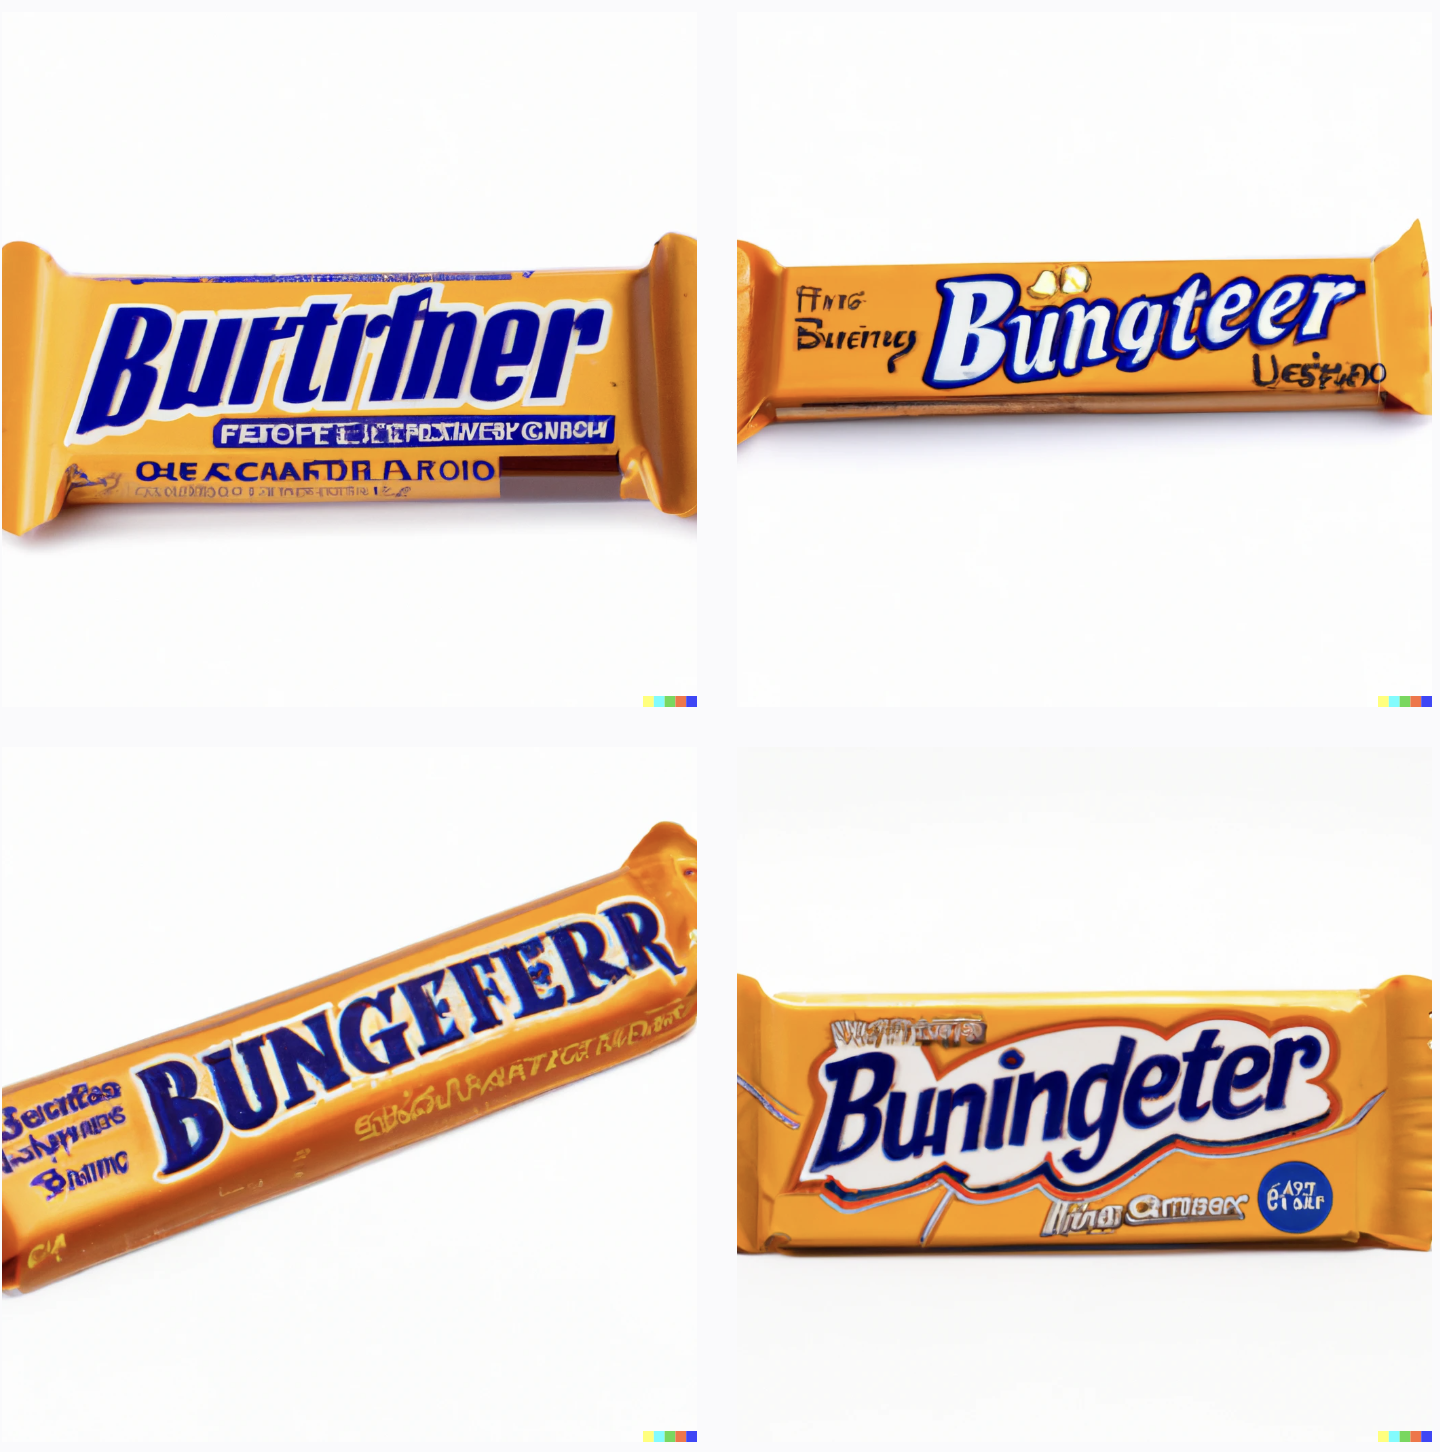 Yellow candy bars with blue lettering on them reading "Burtrfner", "Bungteer", "Bungeferr", and "Buningdeter"